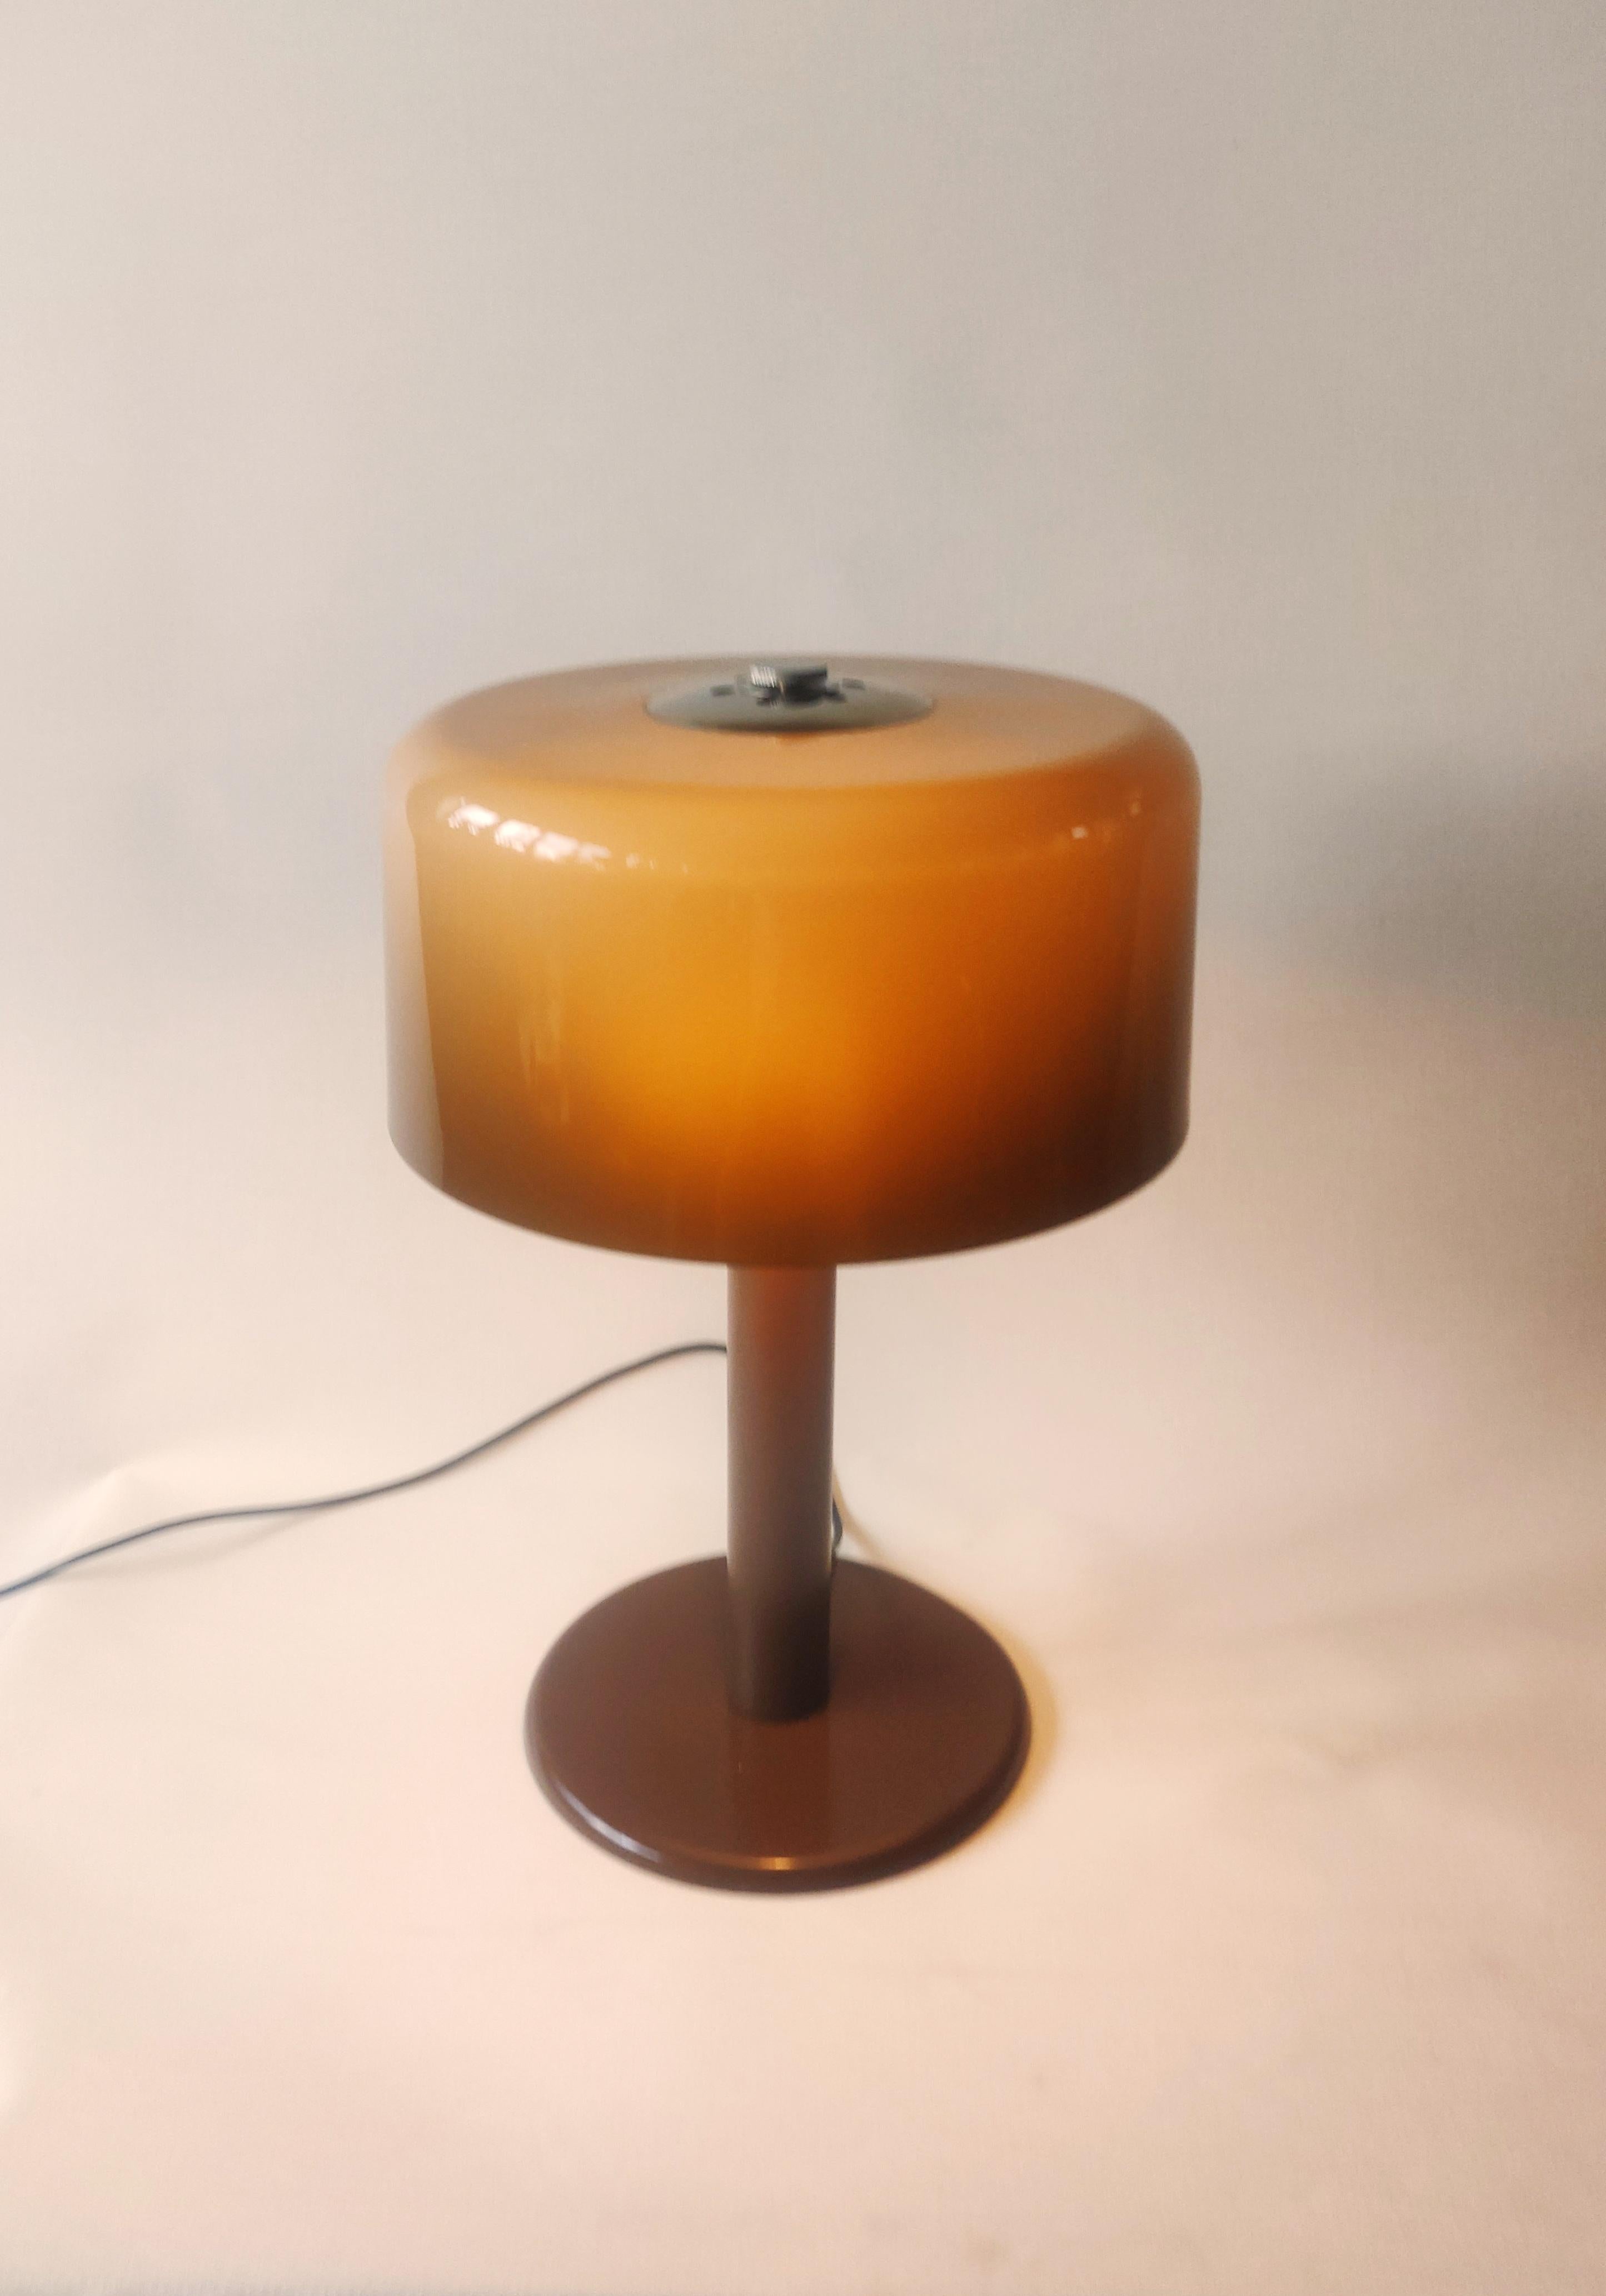 Midcentury Table lamp by Dijkstra Lampen, 1960s.
Space Age table lamp with Lucent brown acrylic lamp shade in style of Harvey Guzzini. 
The lamp needs 2 E14 light bulbs and its wiring has been inspected.

The Dijkstra company was founded in 1922